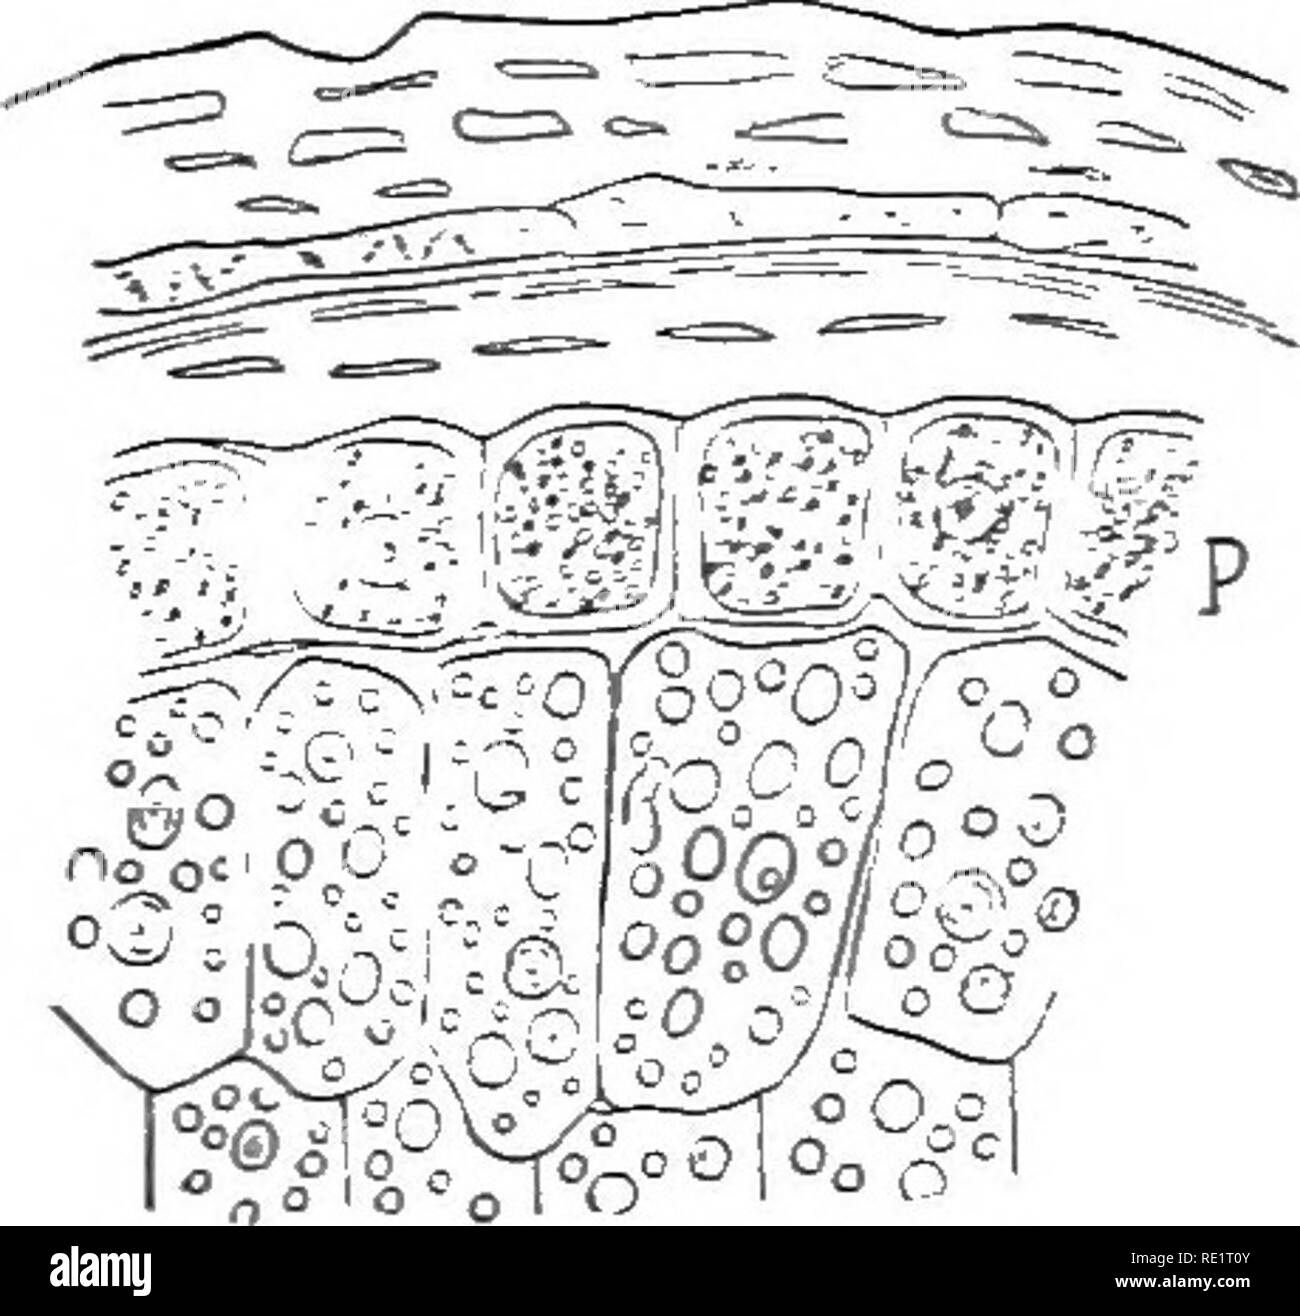 . Nature and development of plants. Botany. FiG. II. Fig. 12. Fig. II. Starch grains: A, from bean. B, from potato. C, compound grain from potato. Fig. 12. Section of the outer portion of a grain of wheat: ^, cells containing proteid grains. The larger cells are filled with starch.—^After Strasburger. sided as in the potato (Fig. 11, B). Frequently two or more grains originate in one leucoplast and compound grains result (Fig. II, C). Proteids and other foods are likewise transported in solution to the storage organs where they may or may not be deposited in solid form. This is usually effecte Stock Photo